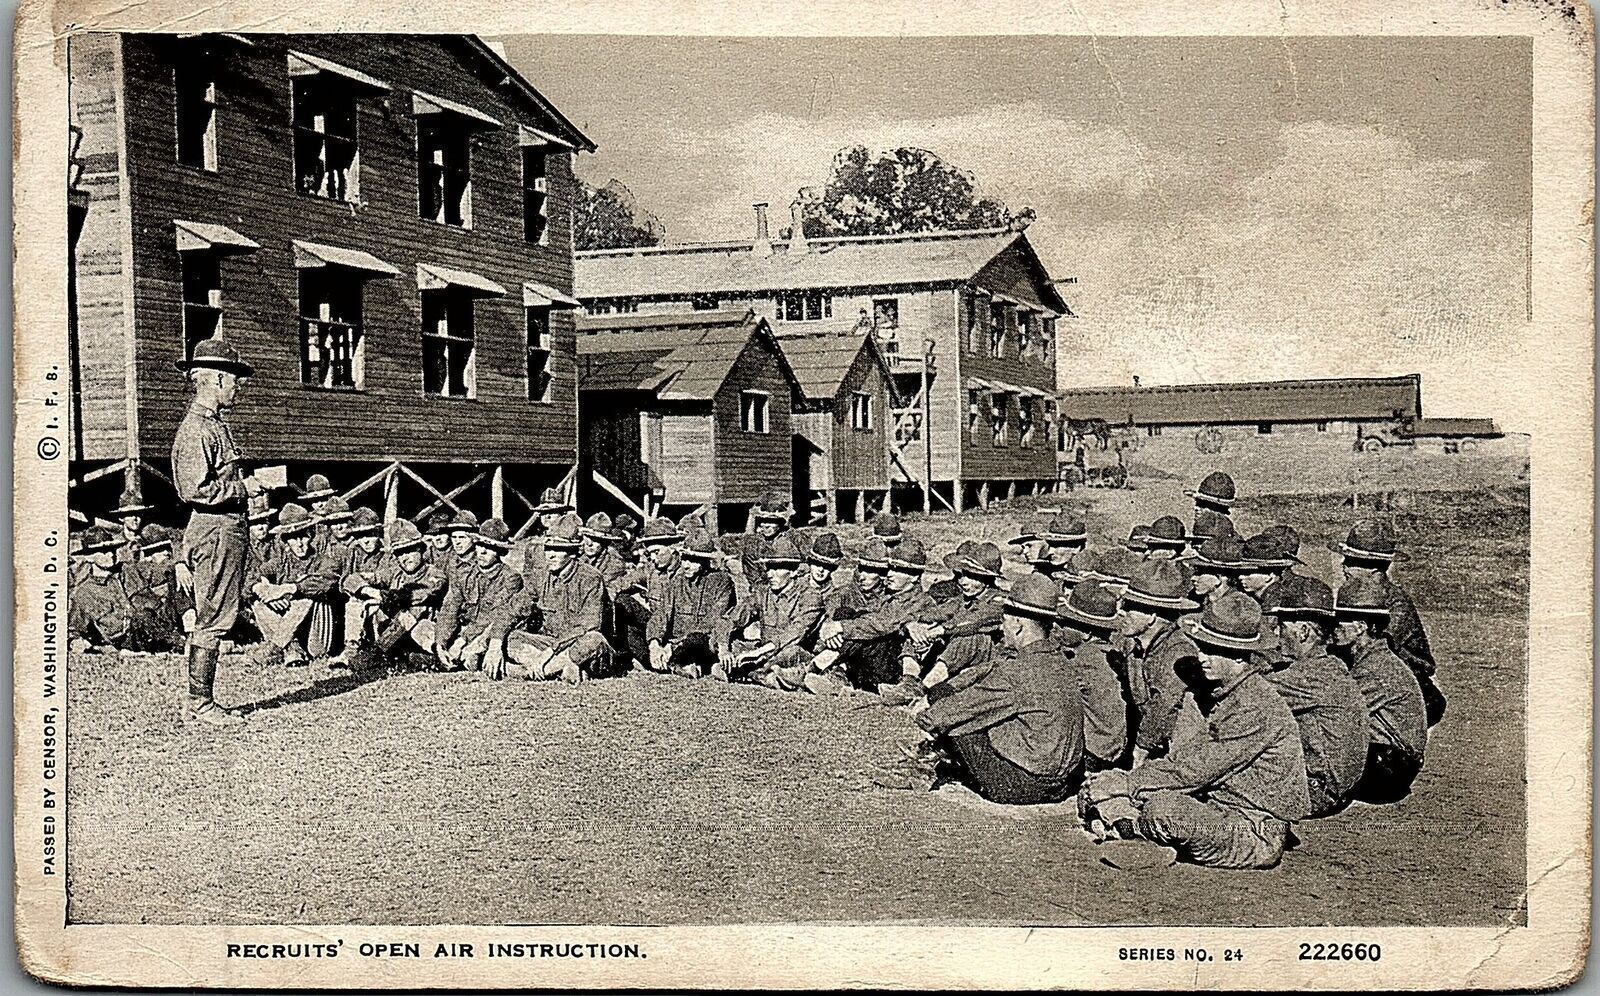 c1918 WWI ARMY CAMP RECRIUTS OPEN AIR INSTRUCTION POSTCARD 29-151